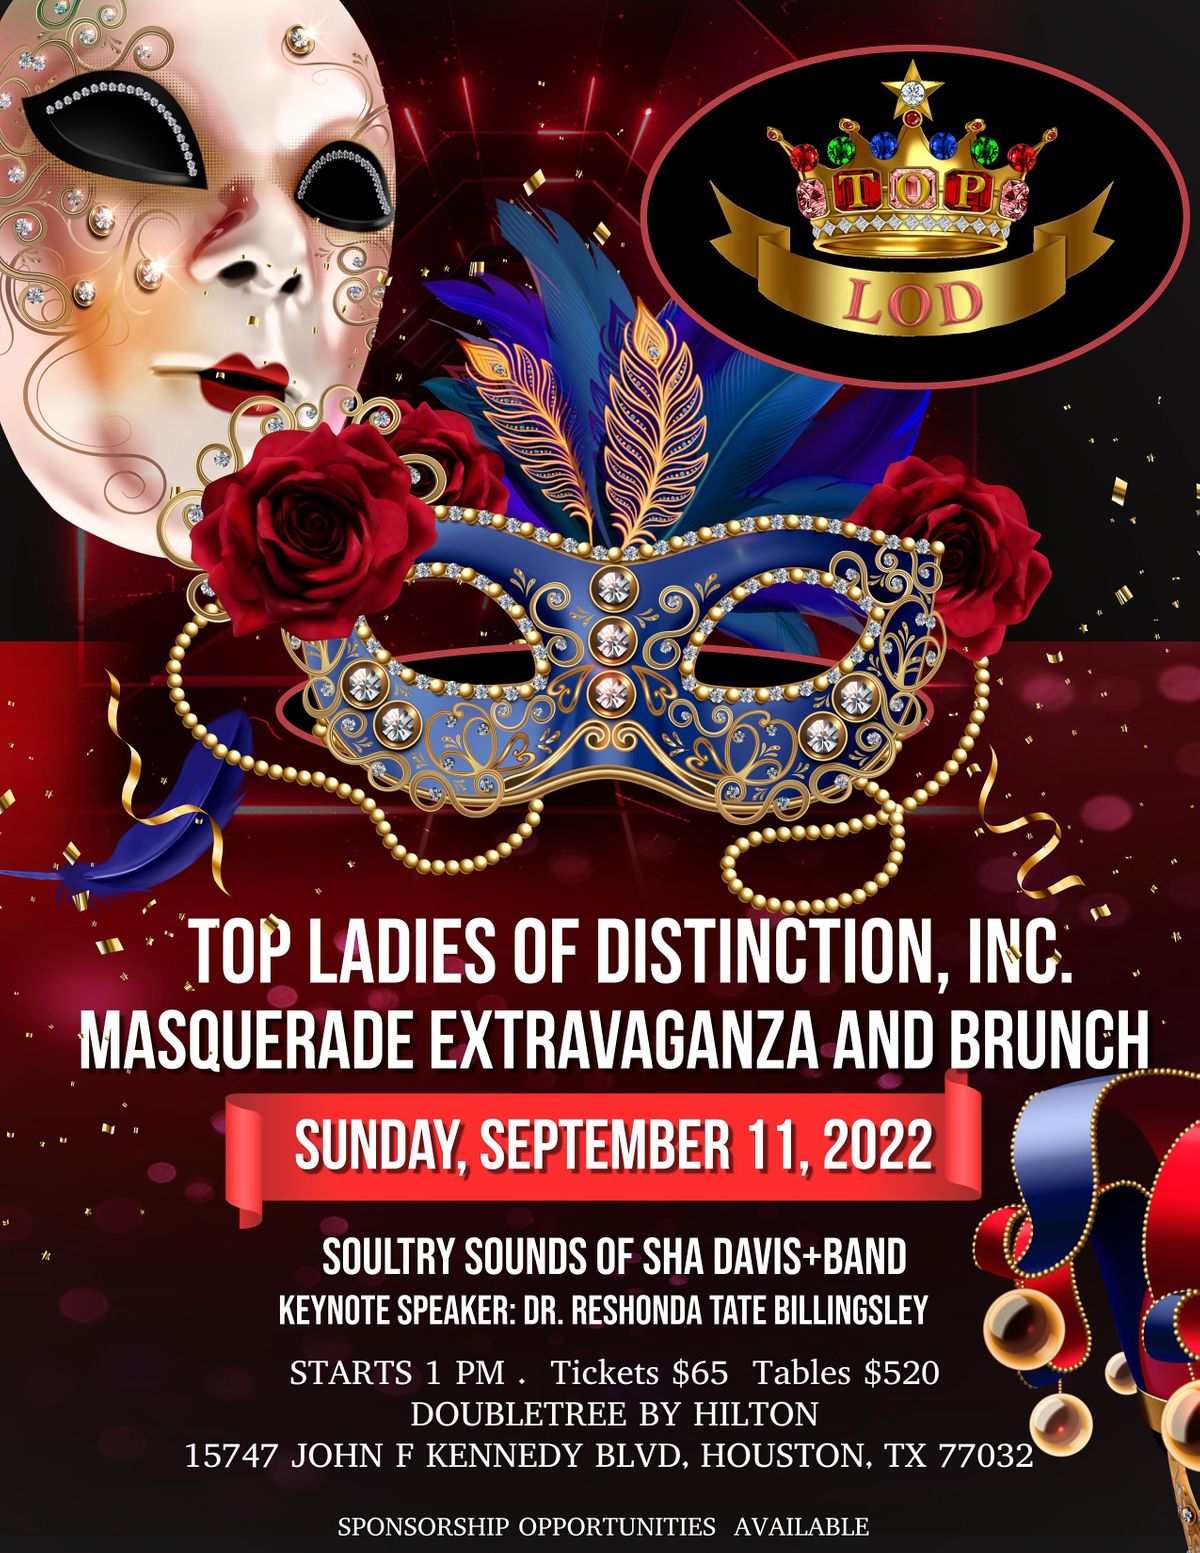 Masquerade Extravaganza and Brunch - Charity Event